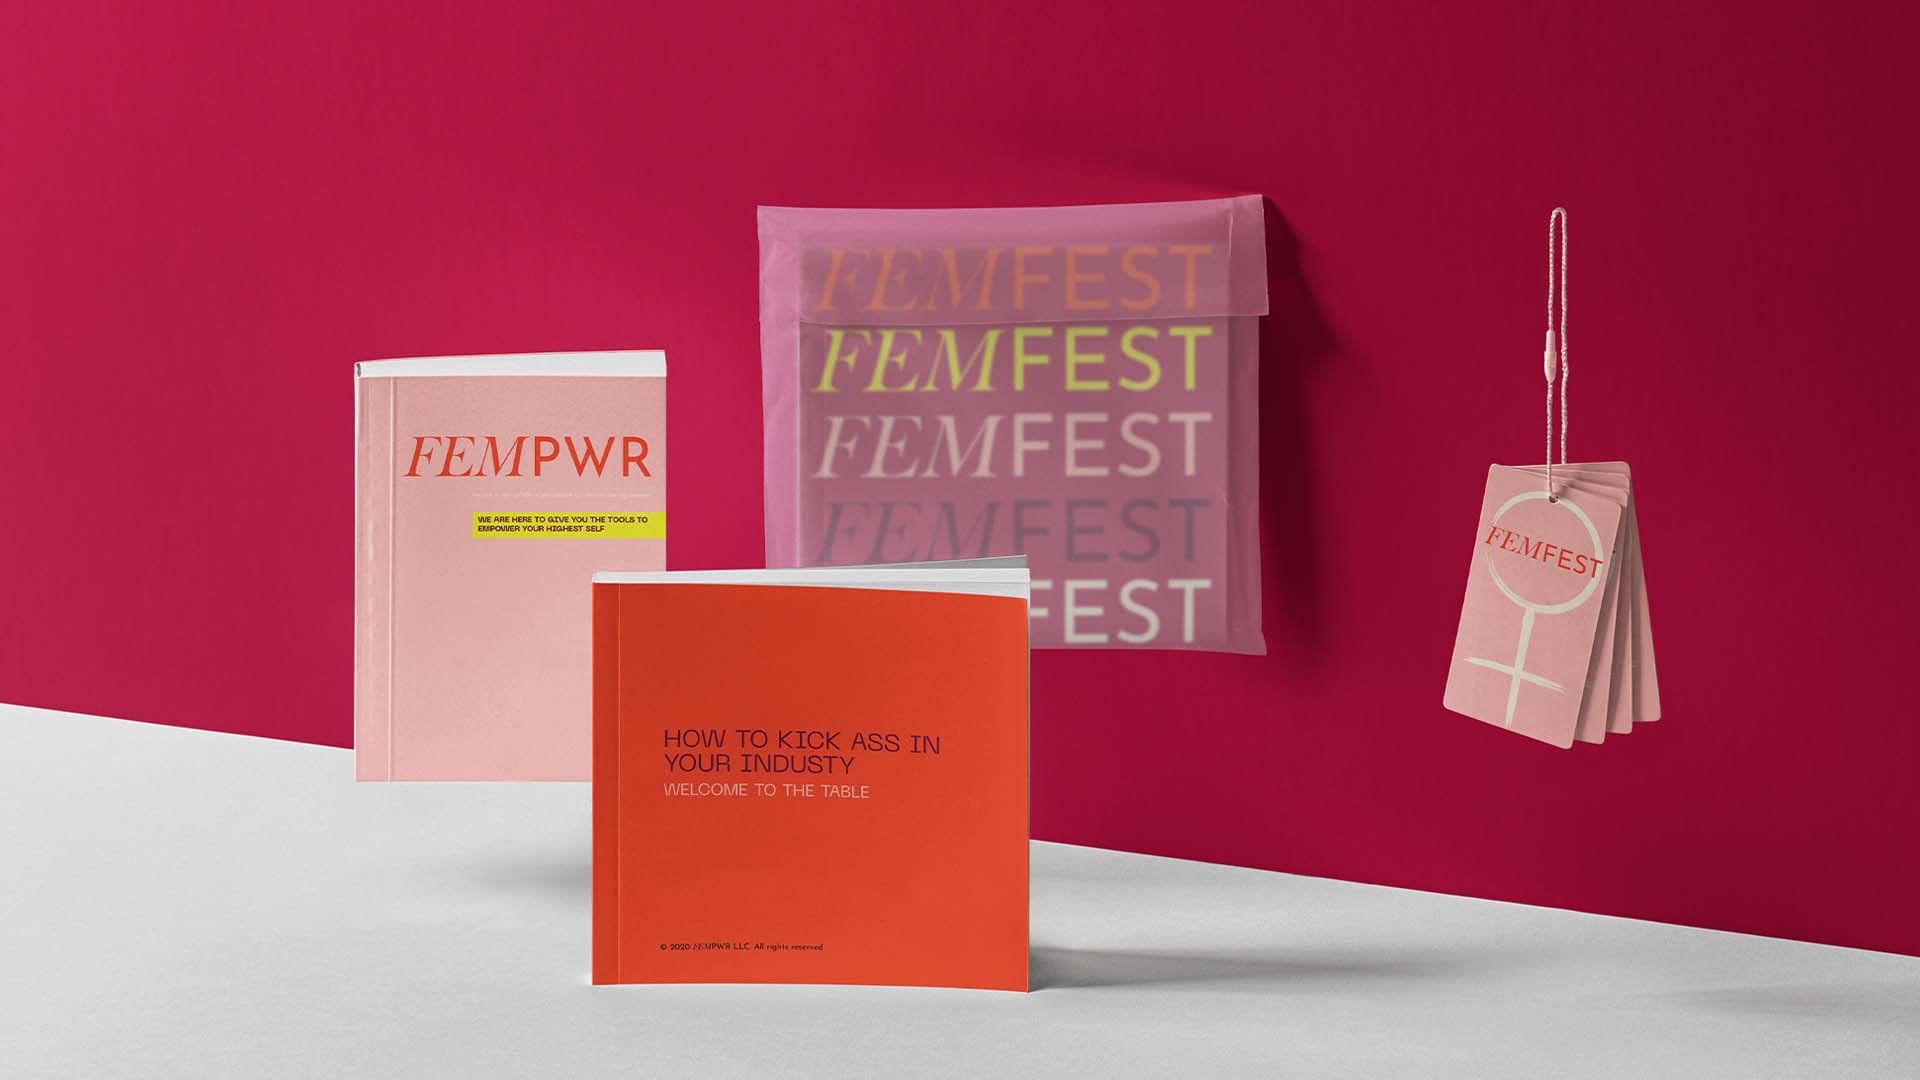 A promotional package for a conference focused on women entrepreneurs in Detroit. There is a red boom with the black title "How to Kick Ass In Your Industry", a pink book with the red text "FemPwr", a string of pink cards with a white female symbol underneath the red text "FemFest", and a purple package with the multicolored repeating text "FemFest". Pictured on a maroon wall.